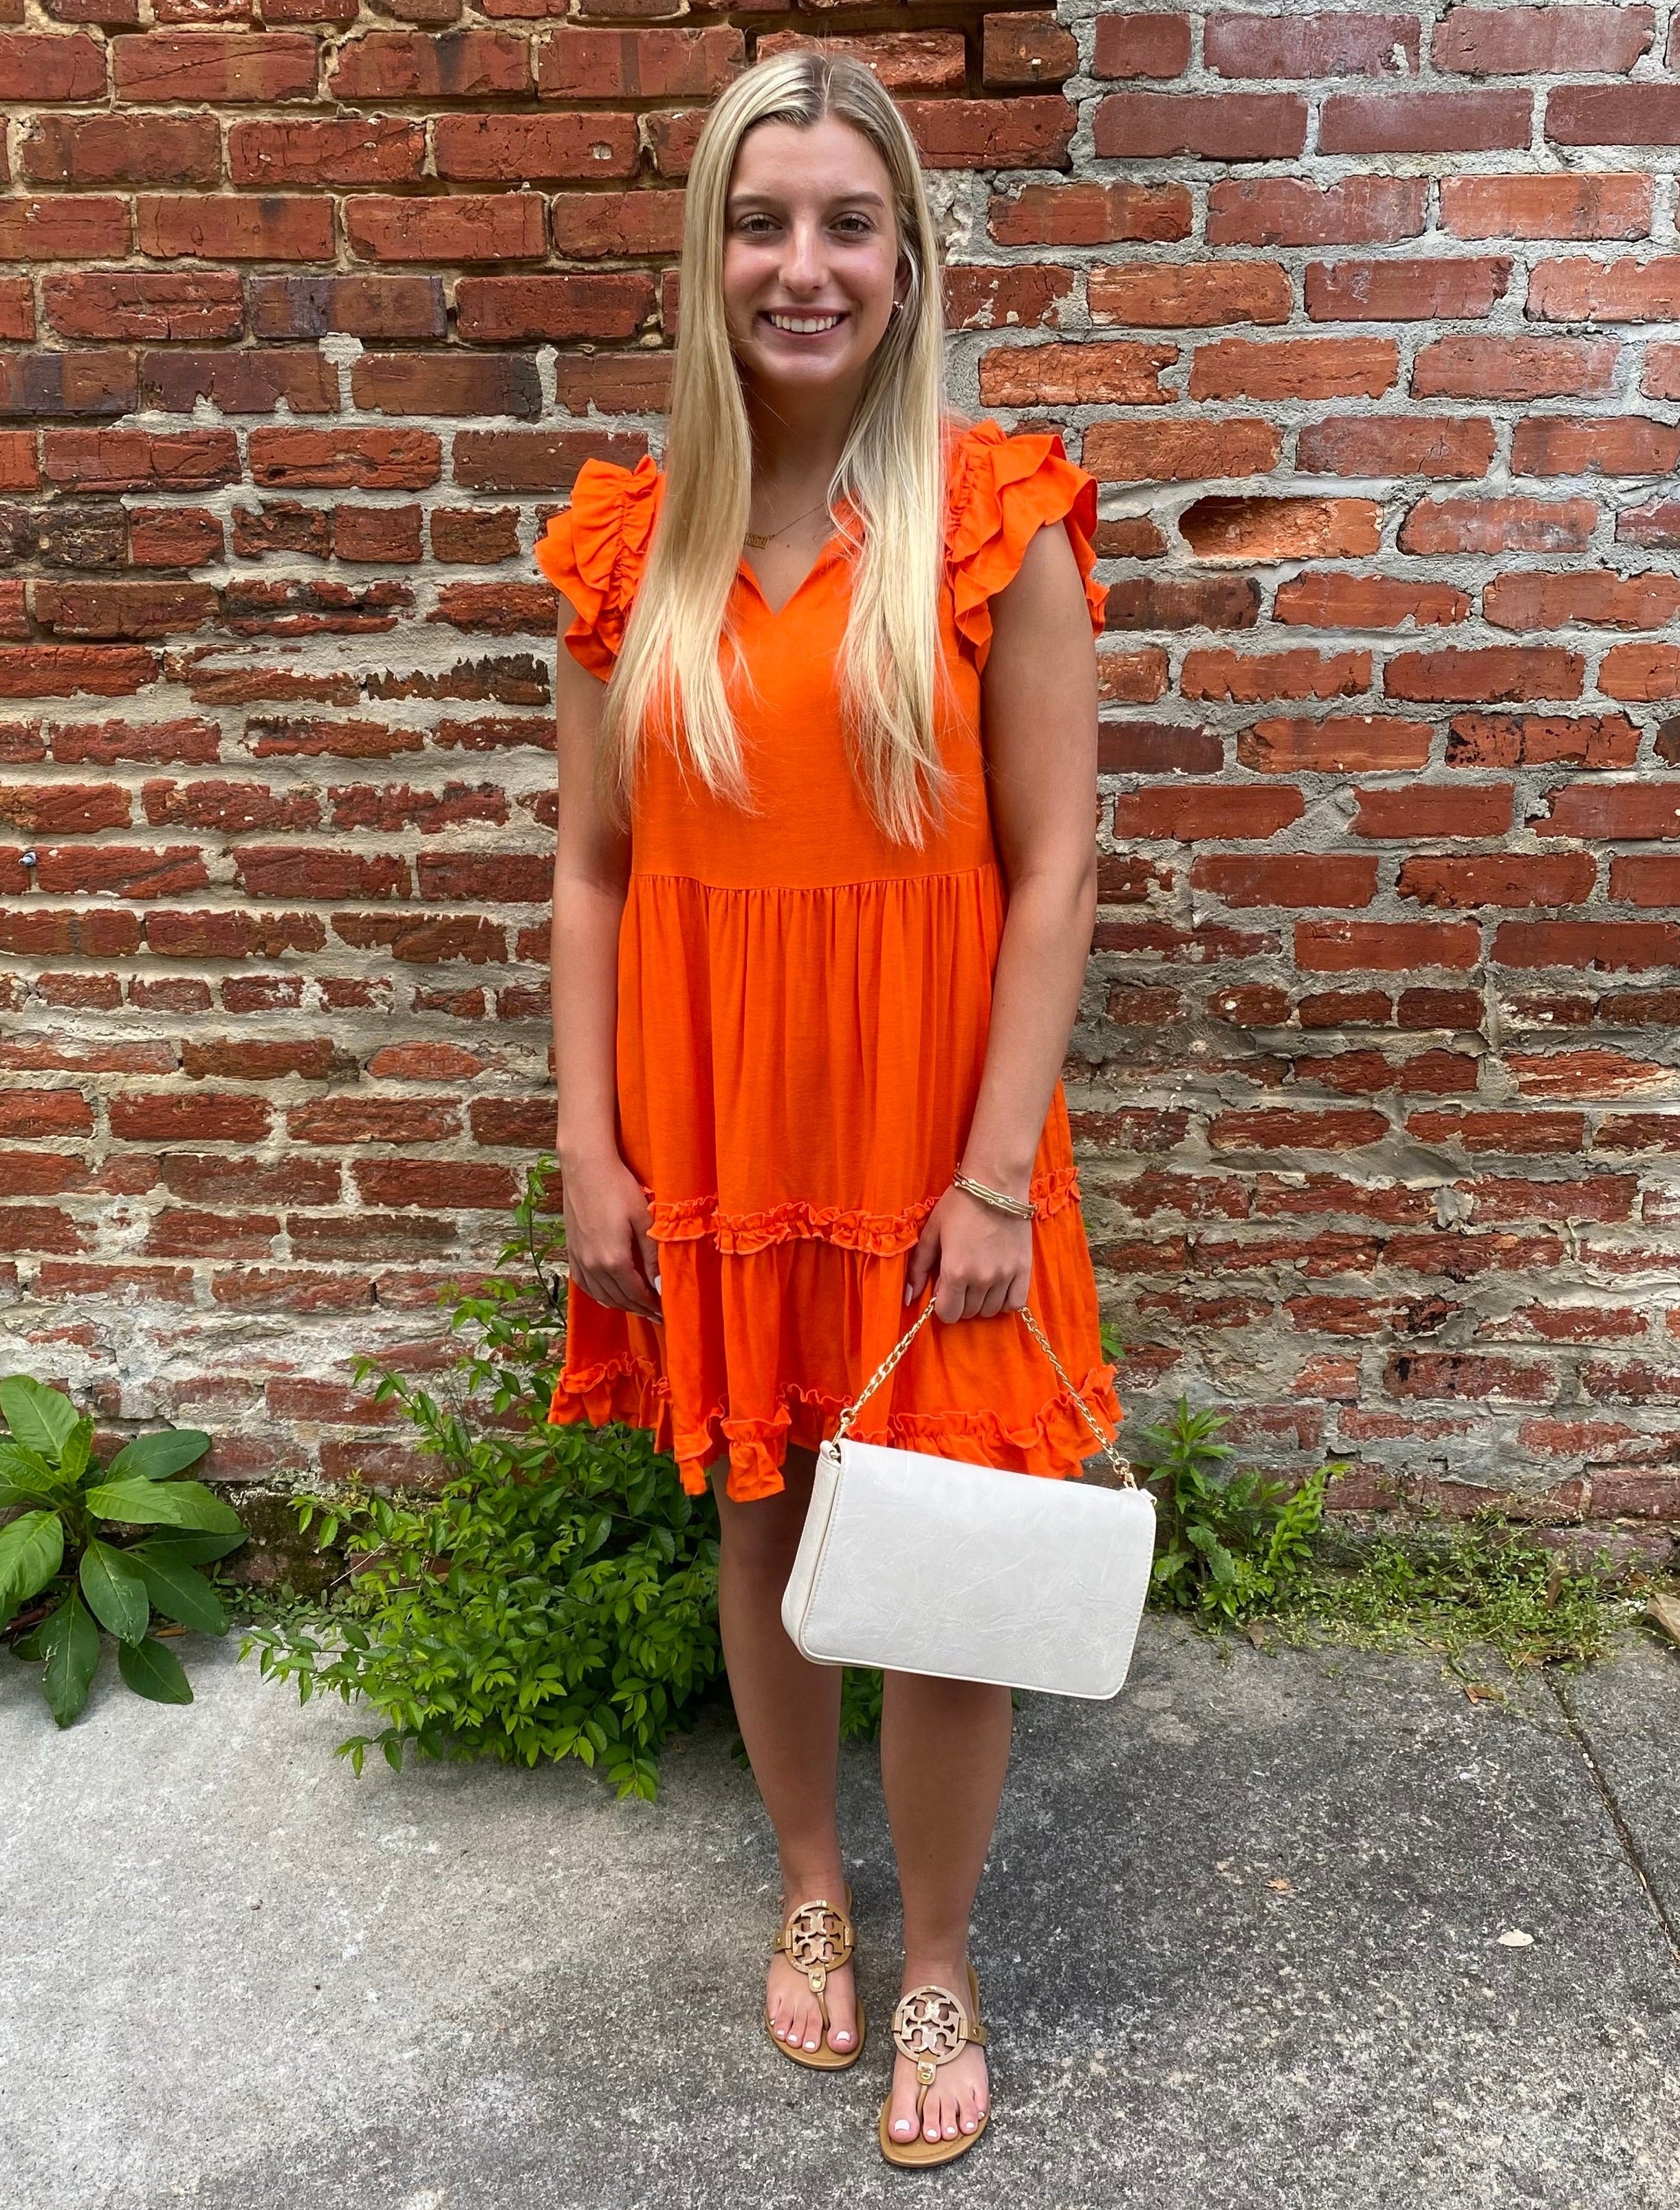 This Ruffle Sleeve V-Neck Tiered Dress is an effortless summer stunner! Its captivating ruffled cap sleeves, V-neck and tiered skirt add a fun, flirty flair to its sunny orange hue. This dress is perfect for a football Saturday in early fall!  Jenna is wearing a small.  Material: 70% Rayon / 30% Linen  Care Instructions: Hand wash cold, flat dry